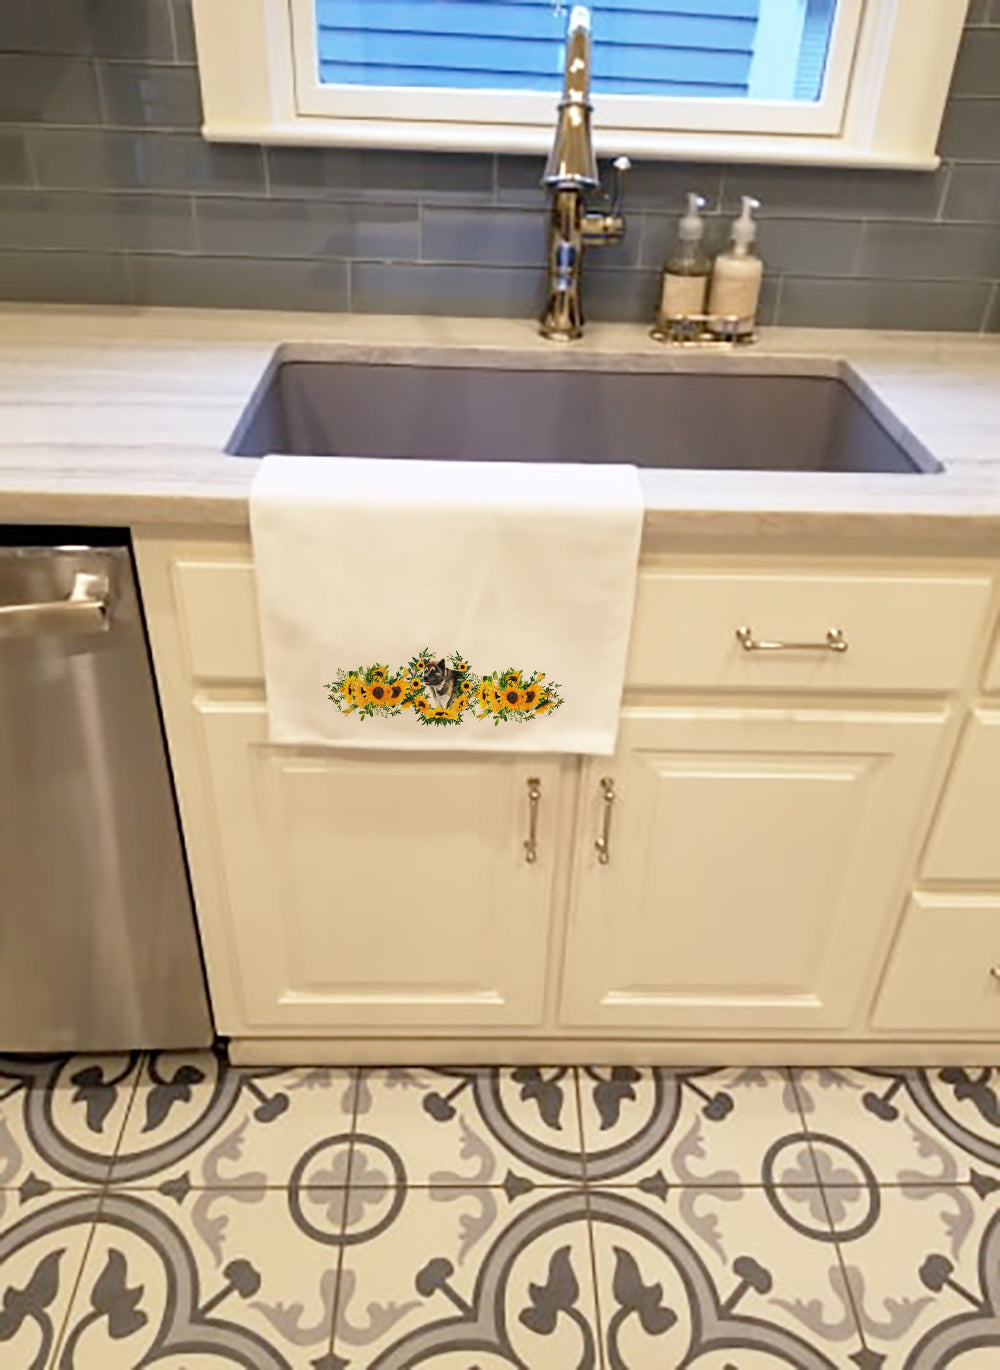 Buy this American Akita in Sunflowers White Kitchen Towel Set of 2